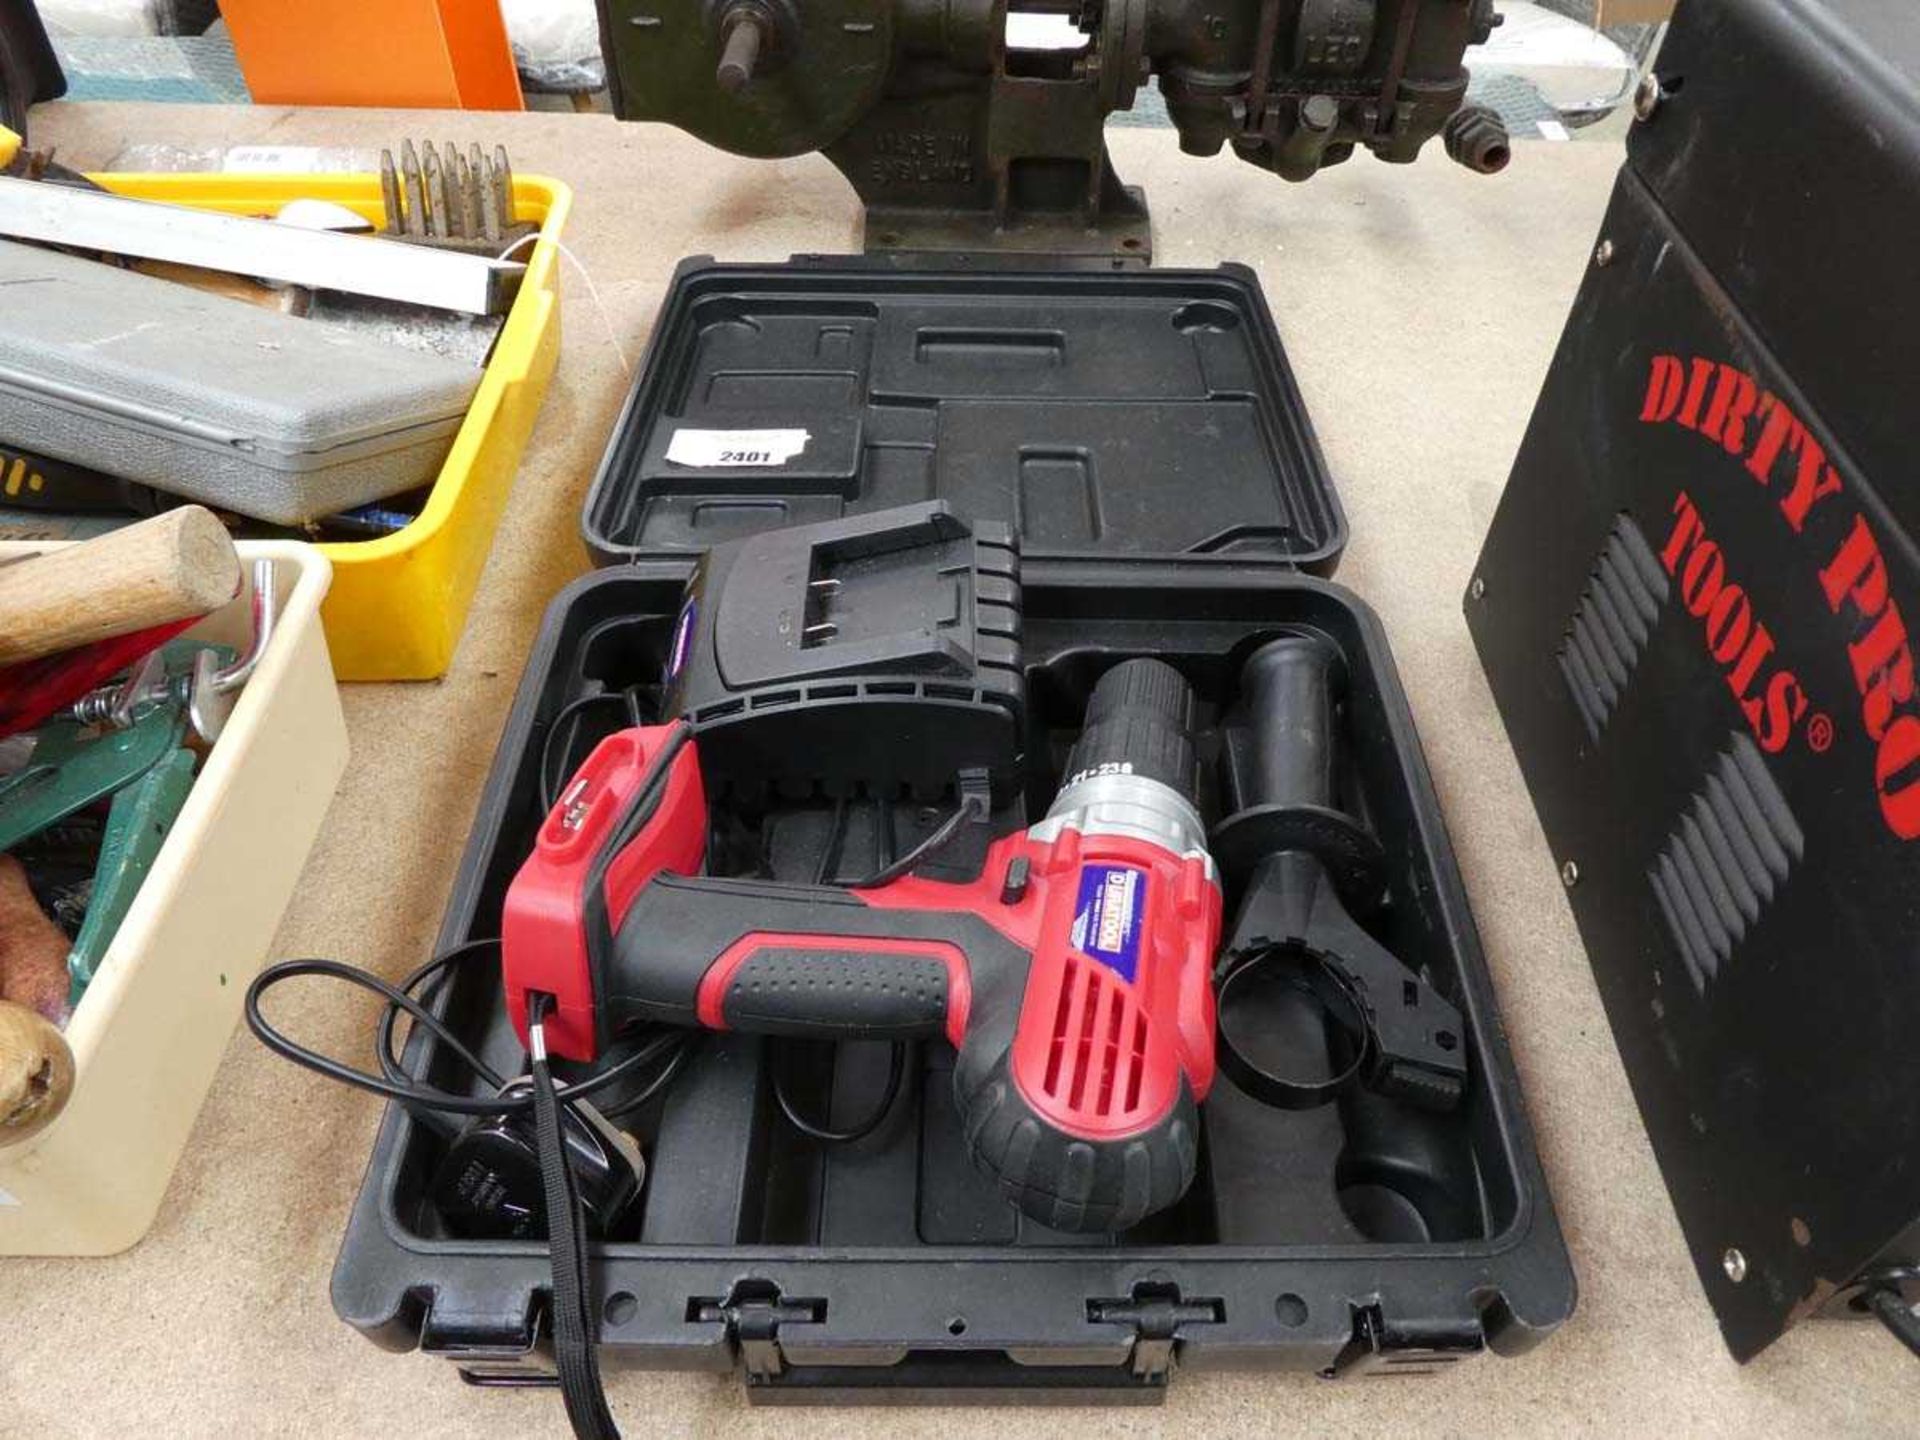 +VAT Cased cordless drill (no battery) with charger